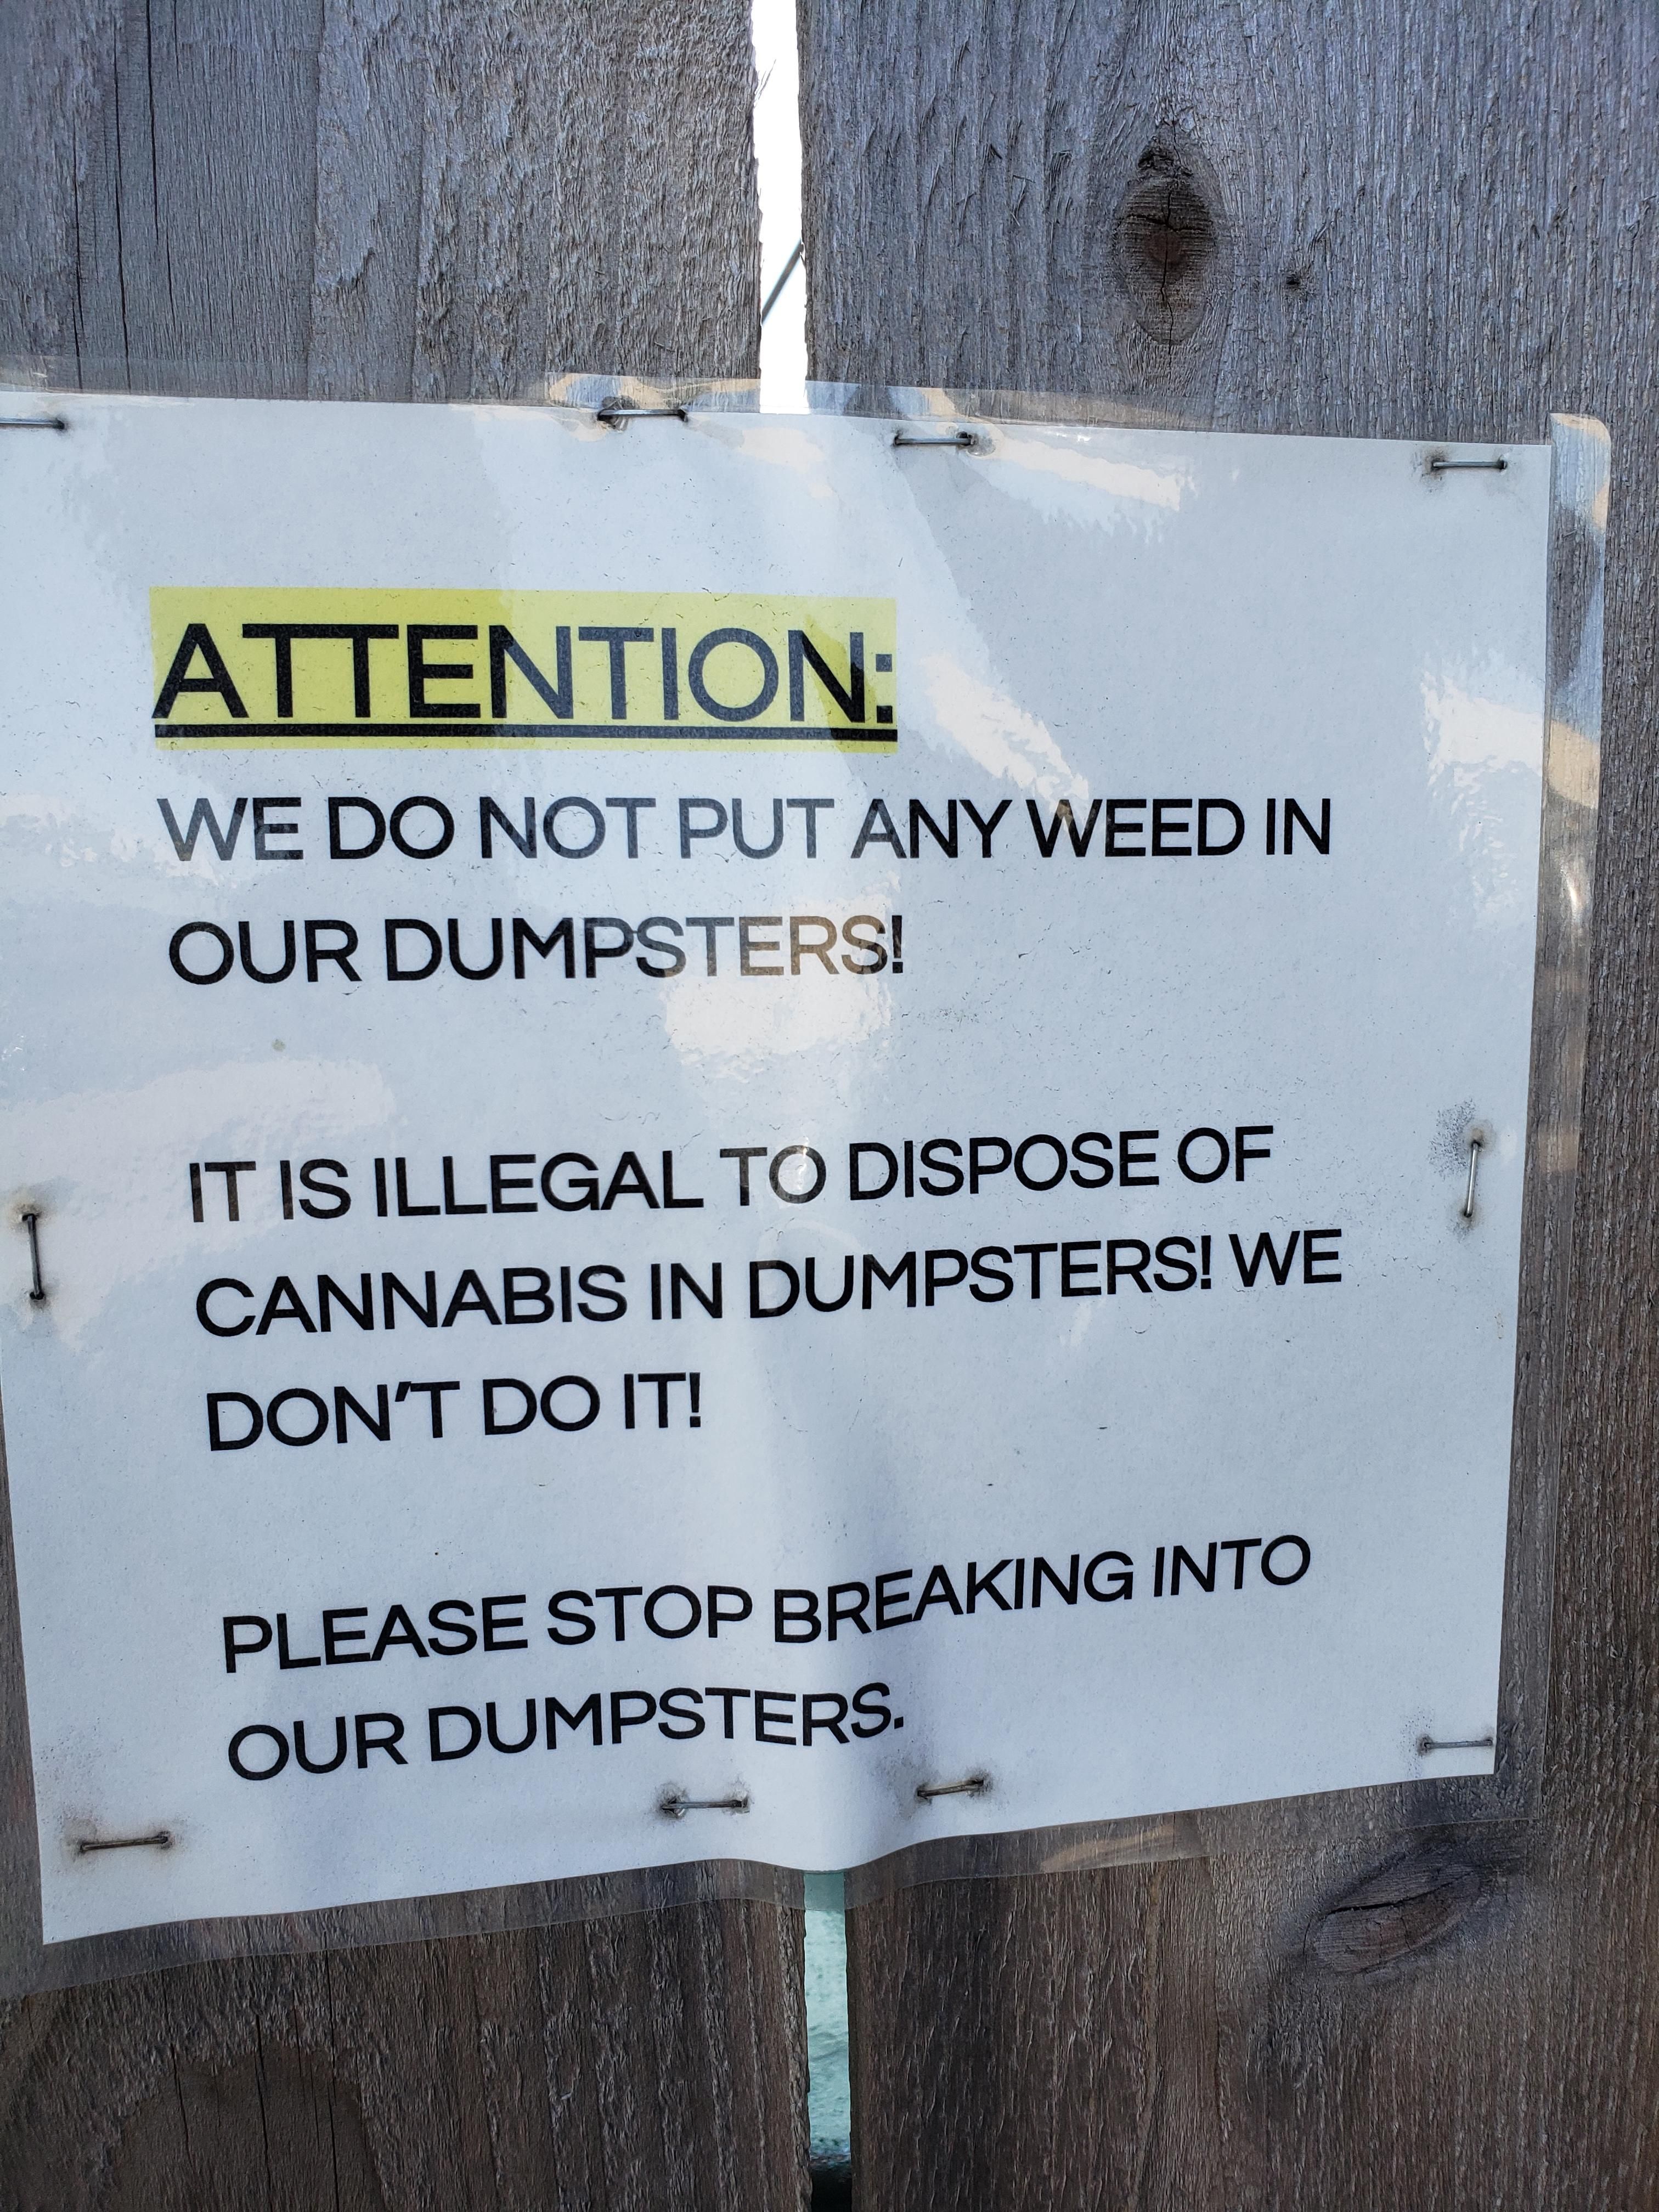 While in Washington State recently, I found this sign outside a weed dispensary.